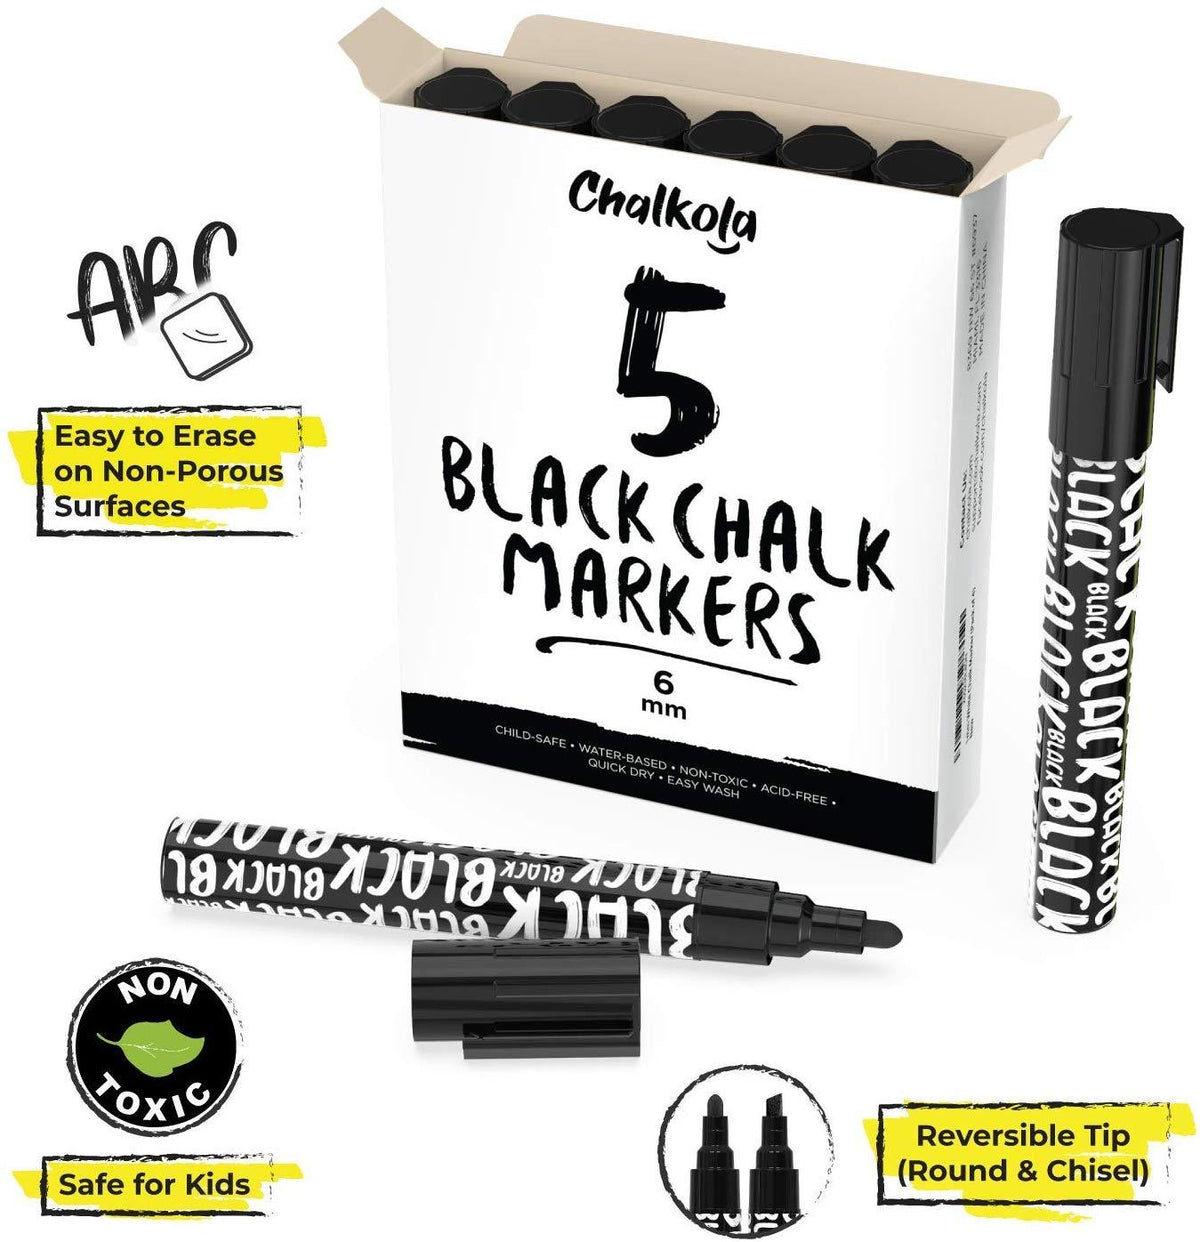 Black Chalk Markers - 6mm Reversible Tip (Pack of 5) - Chalk Markers